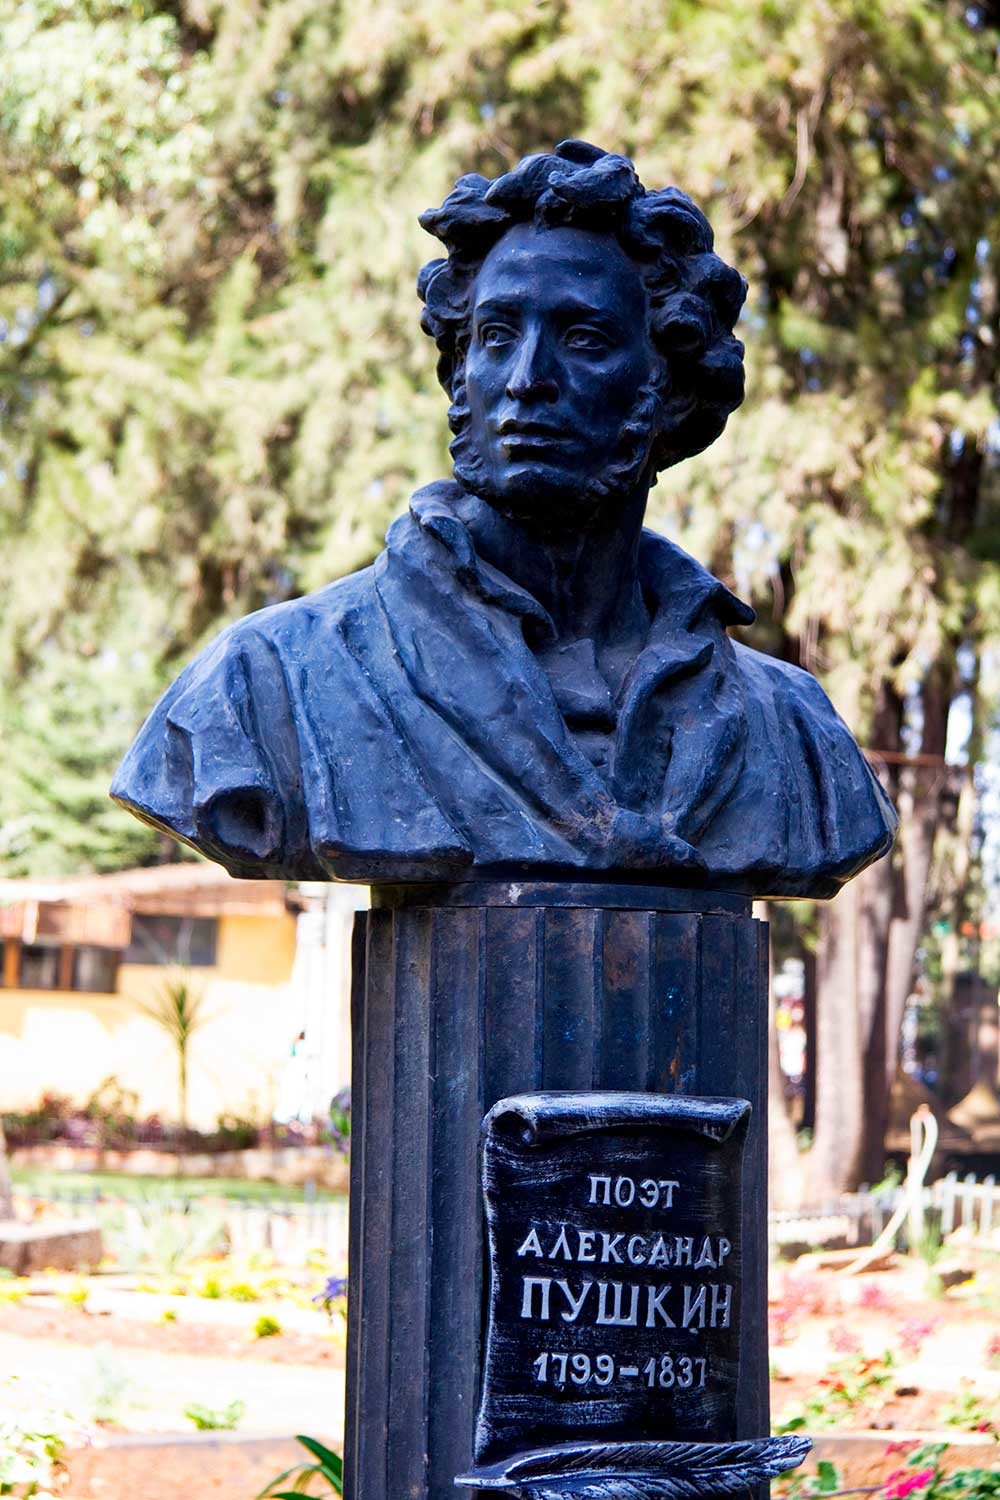 The only monument to Pushkin in Africa, Ethiopia